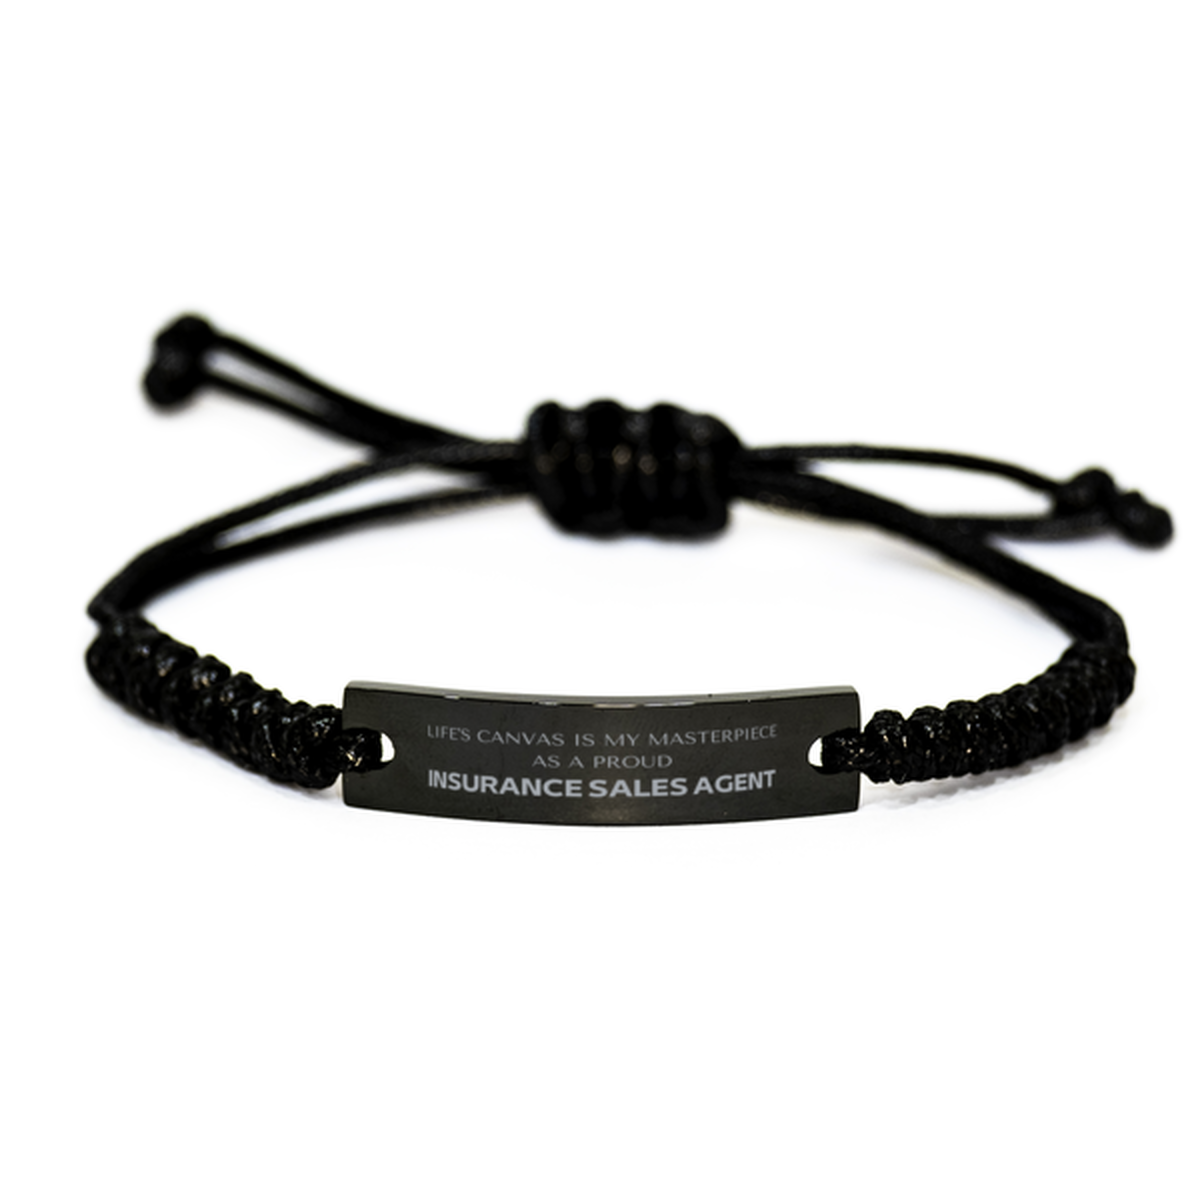 Proud Insurance Sales Agent Gifts, Life's canvas is my masterpiece, Epic Birthday Christmas Unique Black Rope Bracelet For Insurance Sales Agent, Coworkers, Men, Women, Friends